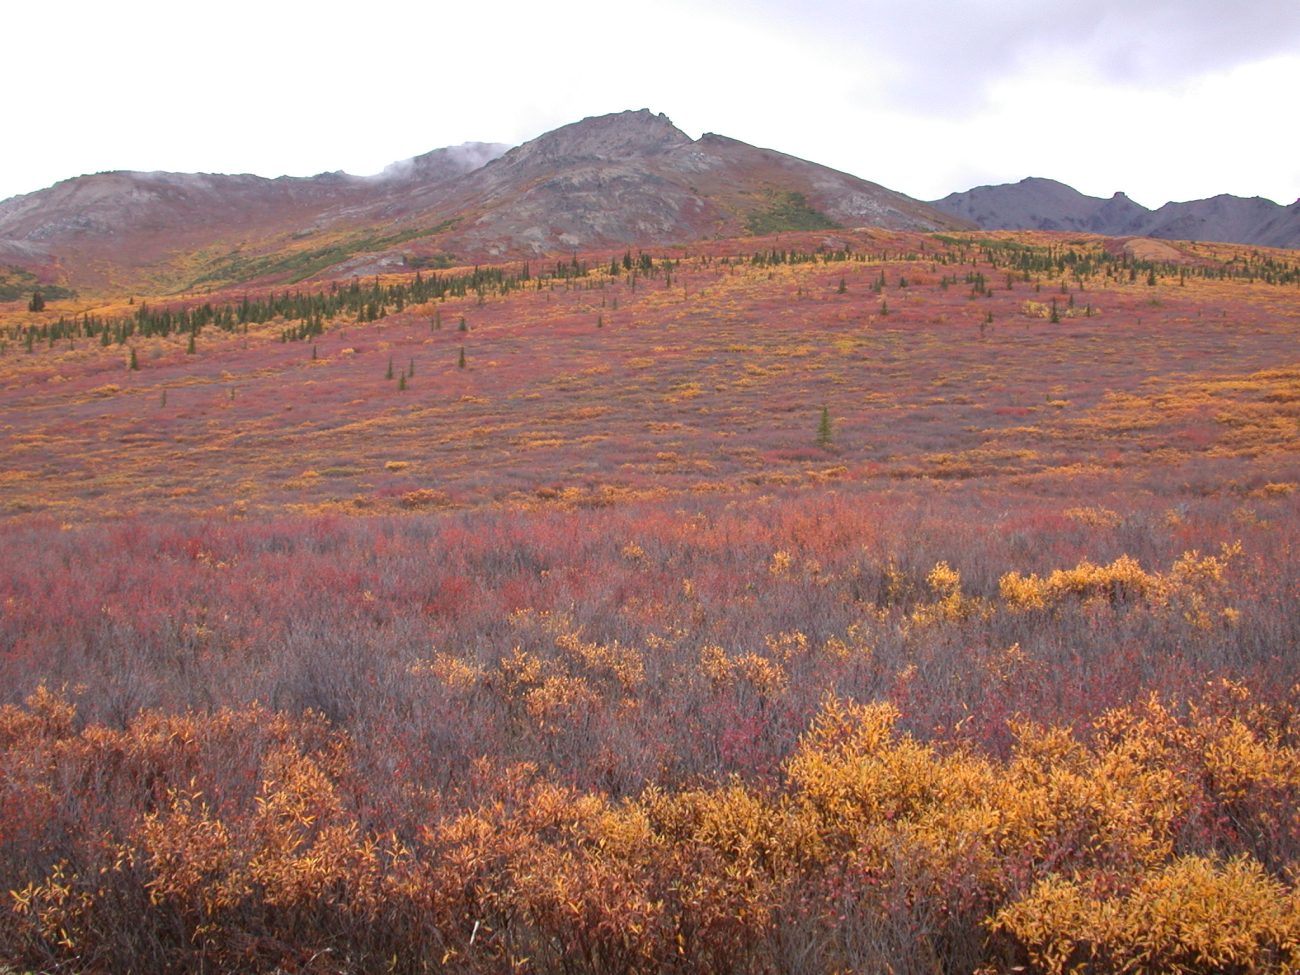 Fall colors, stunted evergreens, and barren alpine mountains of South CentralAlaska